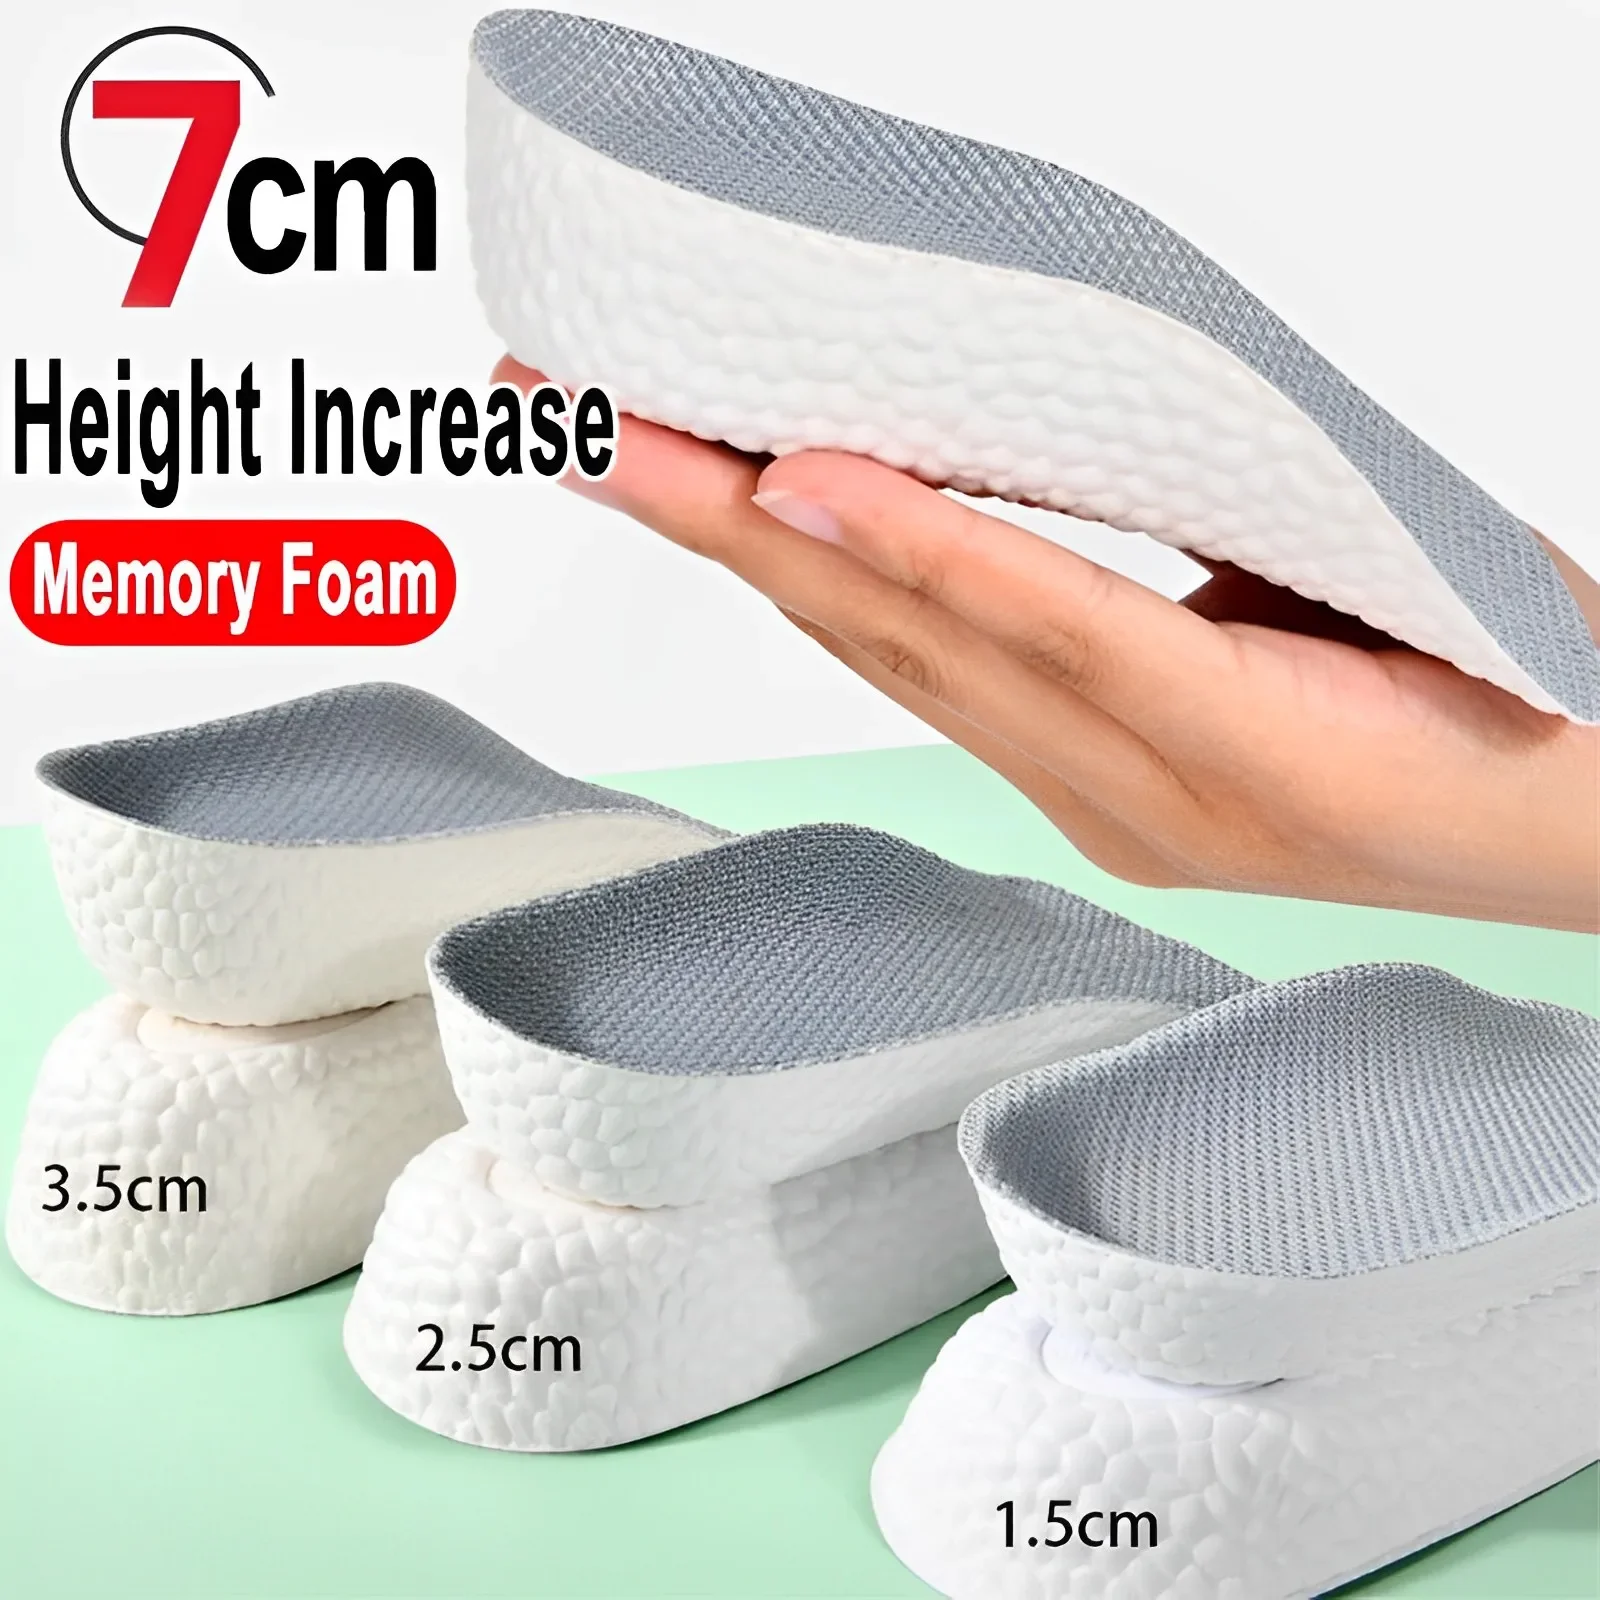 

Soft Memory Foam Height Increase Insoles Men Women Shoes Flat Feet Arch Support Orthopedic Insoles Sneakers Heel Lift Shoe Pads